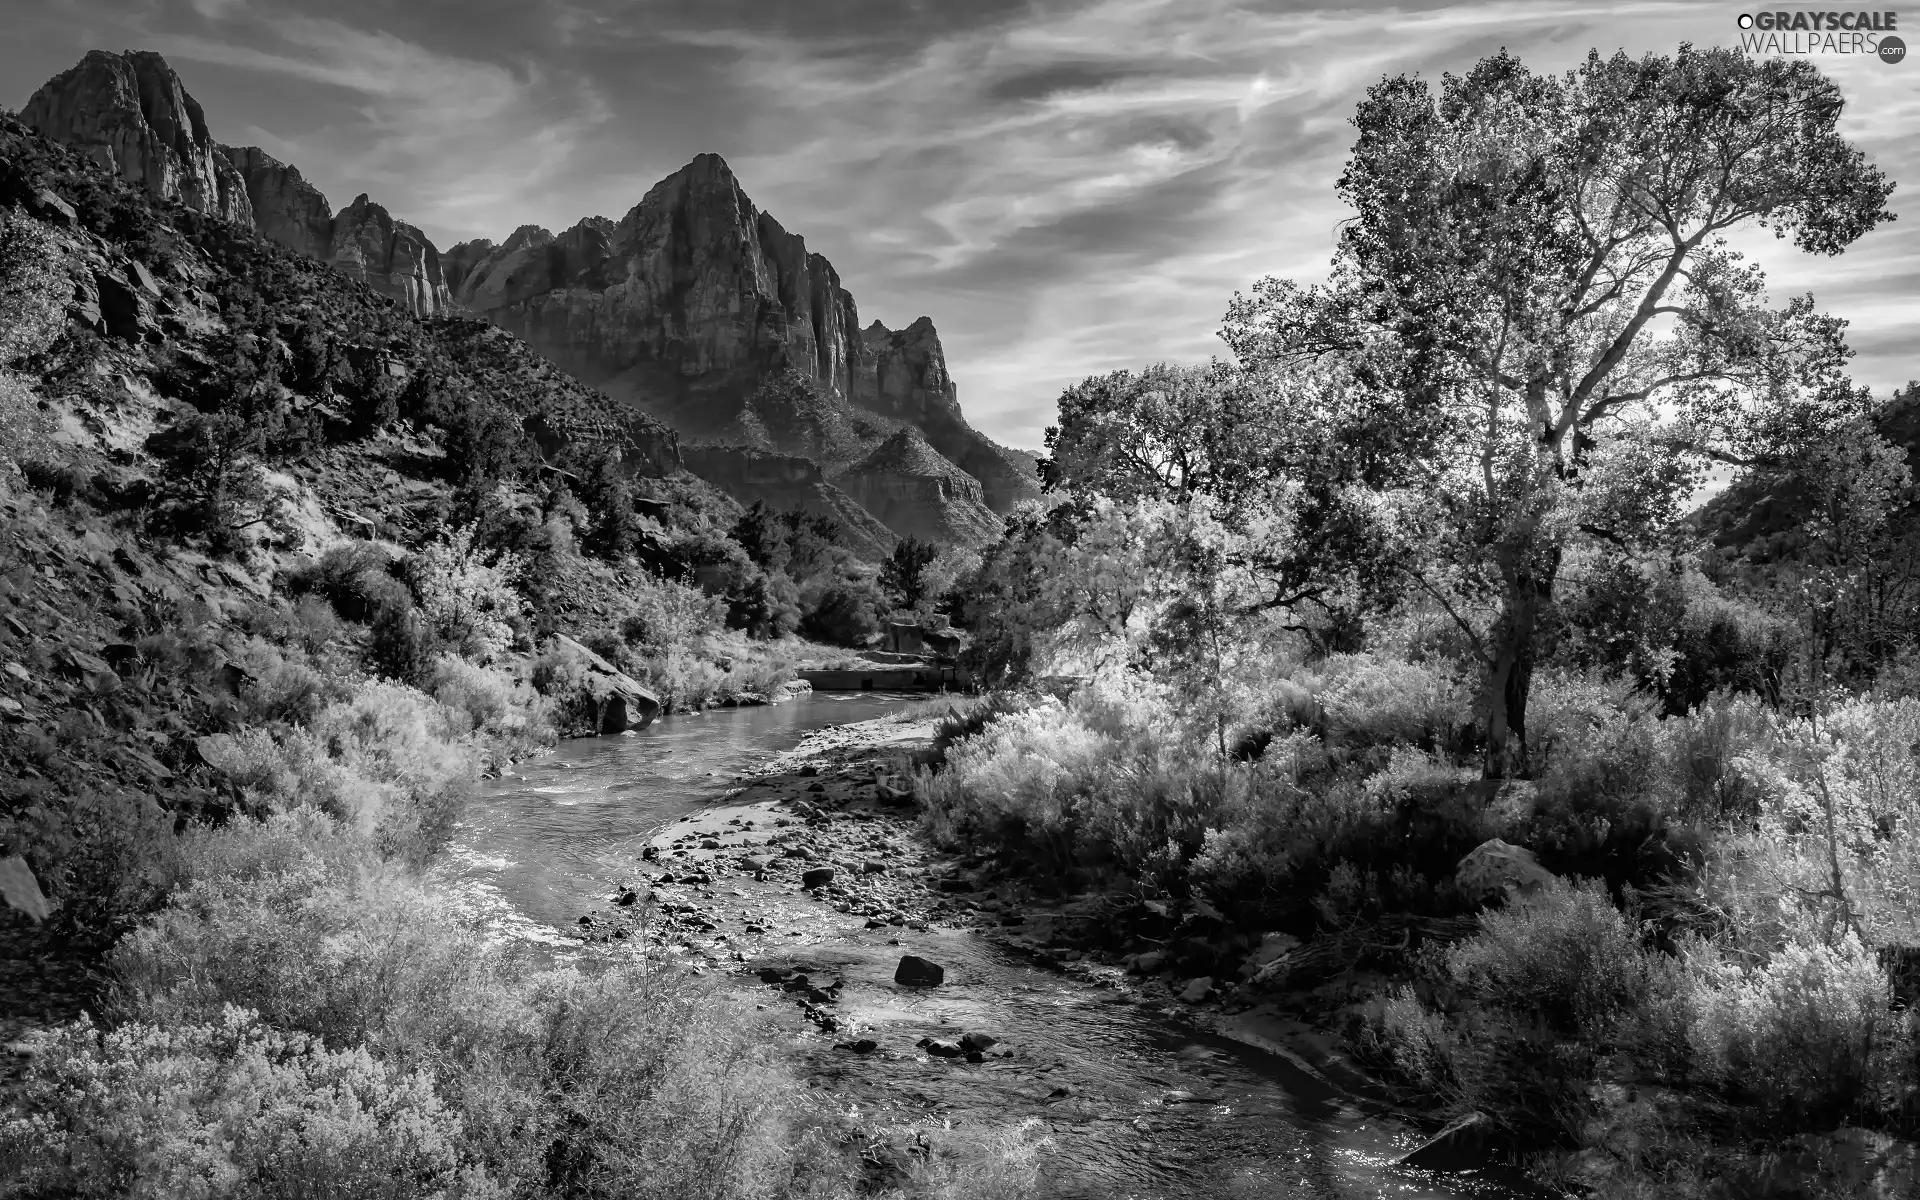 Zion National Park, Watchman Mountains, viewes, Virgin River, trees, Utah State, The United States, Stones